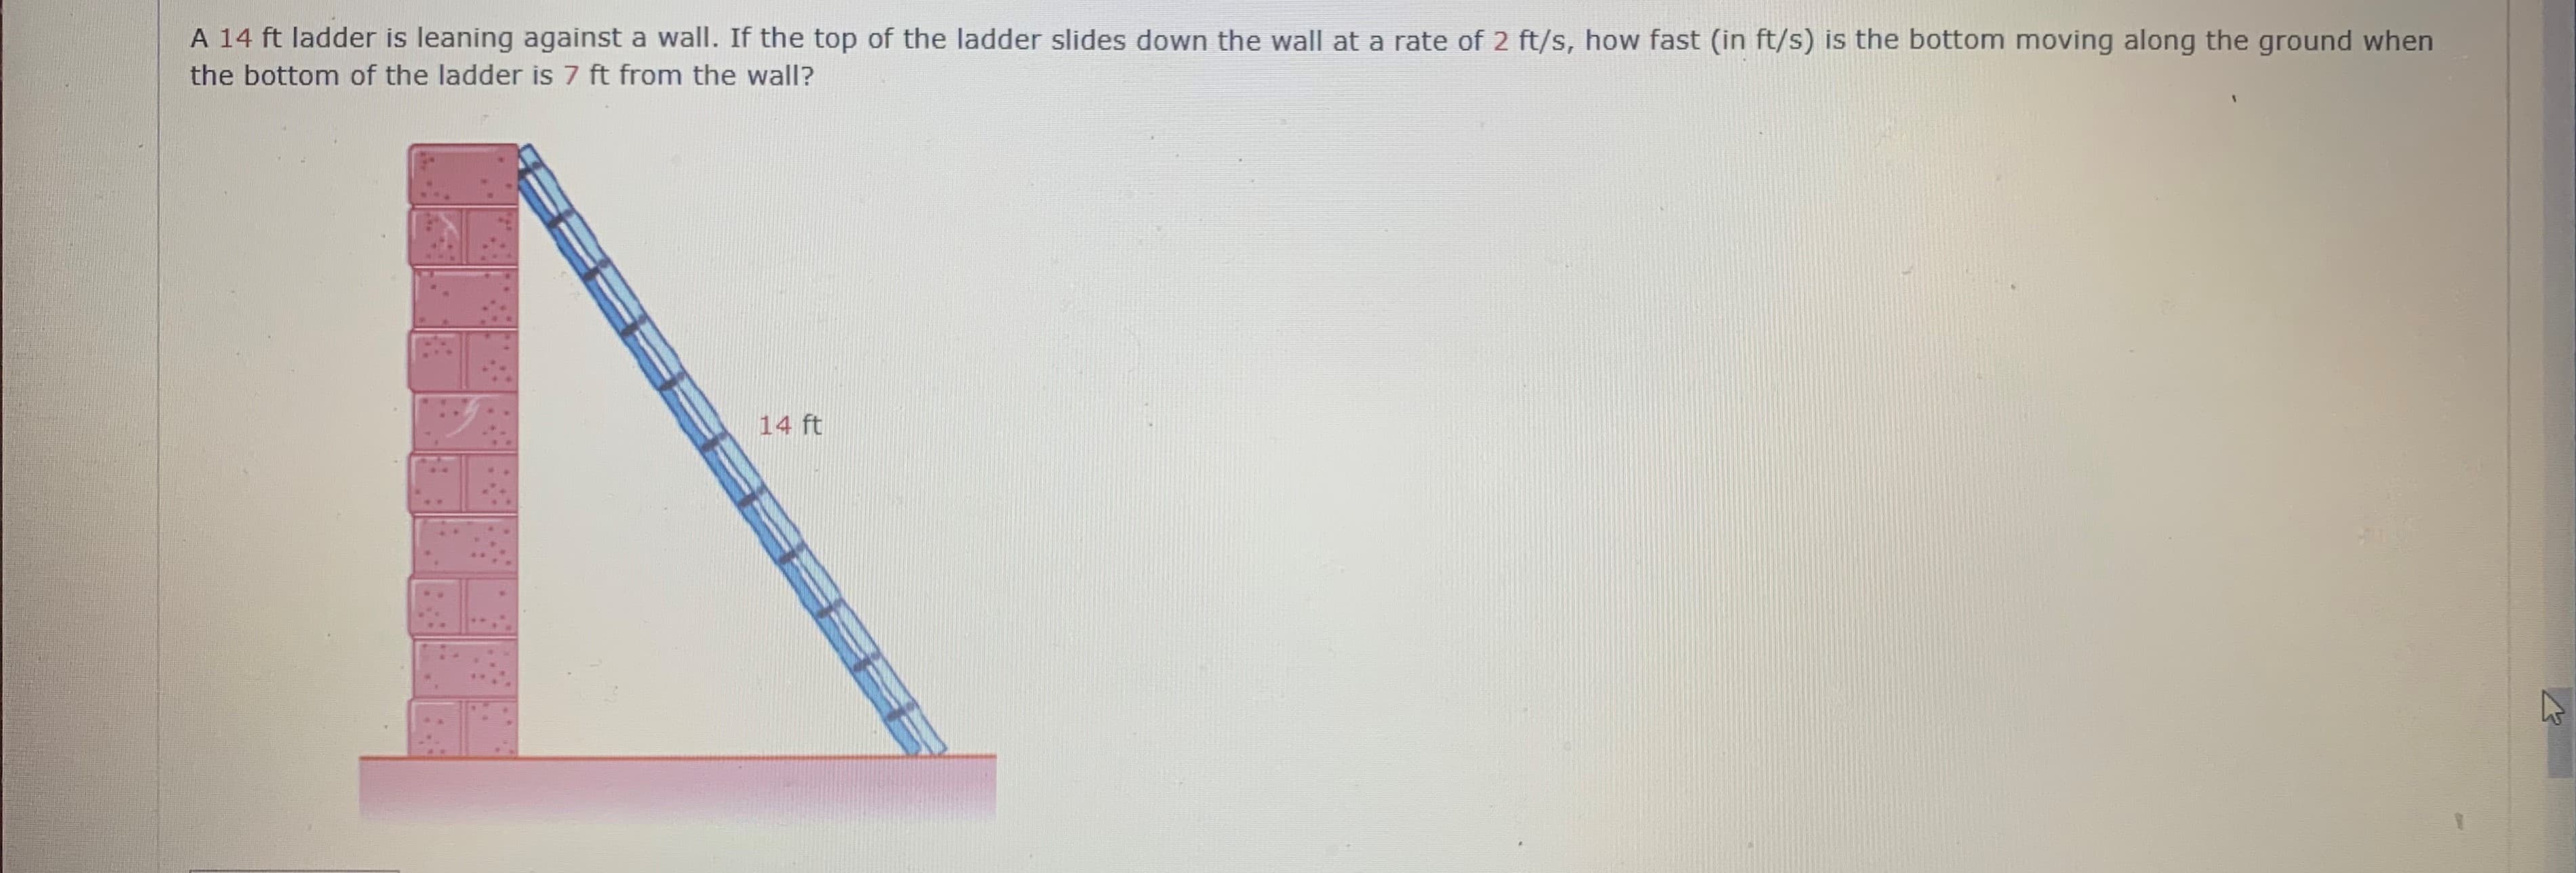 A 14 ft ladder is leaning against a wall. If the top of the ladder slides down the wall at a rate of 2 ft/s, how fast (in ft/s) is the bottom moving along the ground when
the bottom of the ladder is 7 ft from the wall?
14 ft
